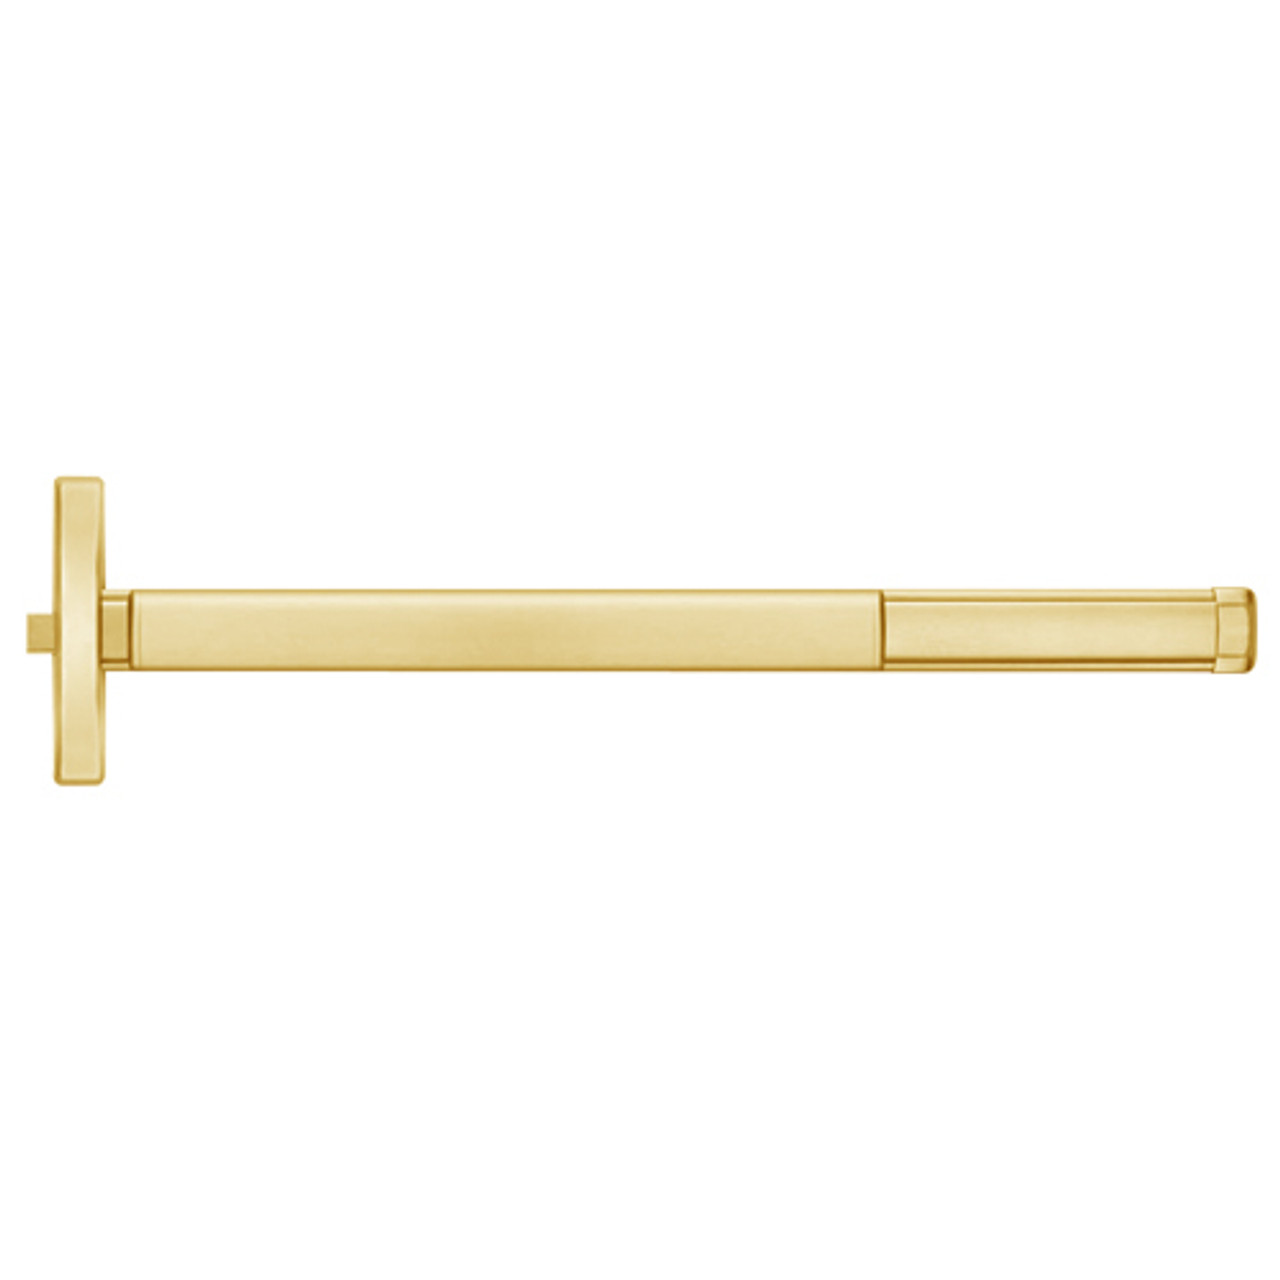 MLR2402-605-48 PHI 2400 Series Non Fire Rated Apex Rim Exit Device with Motorized Latch Retraction Prepped for Dummy Trim in Bright Brass Finish